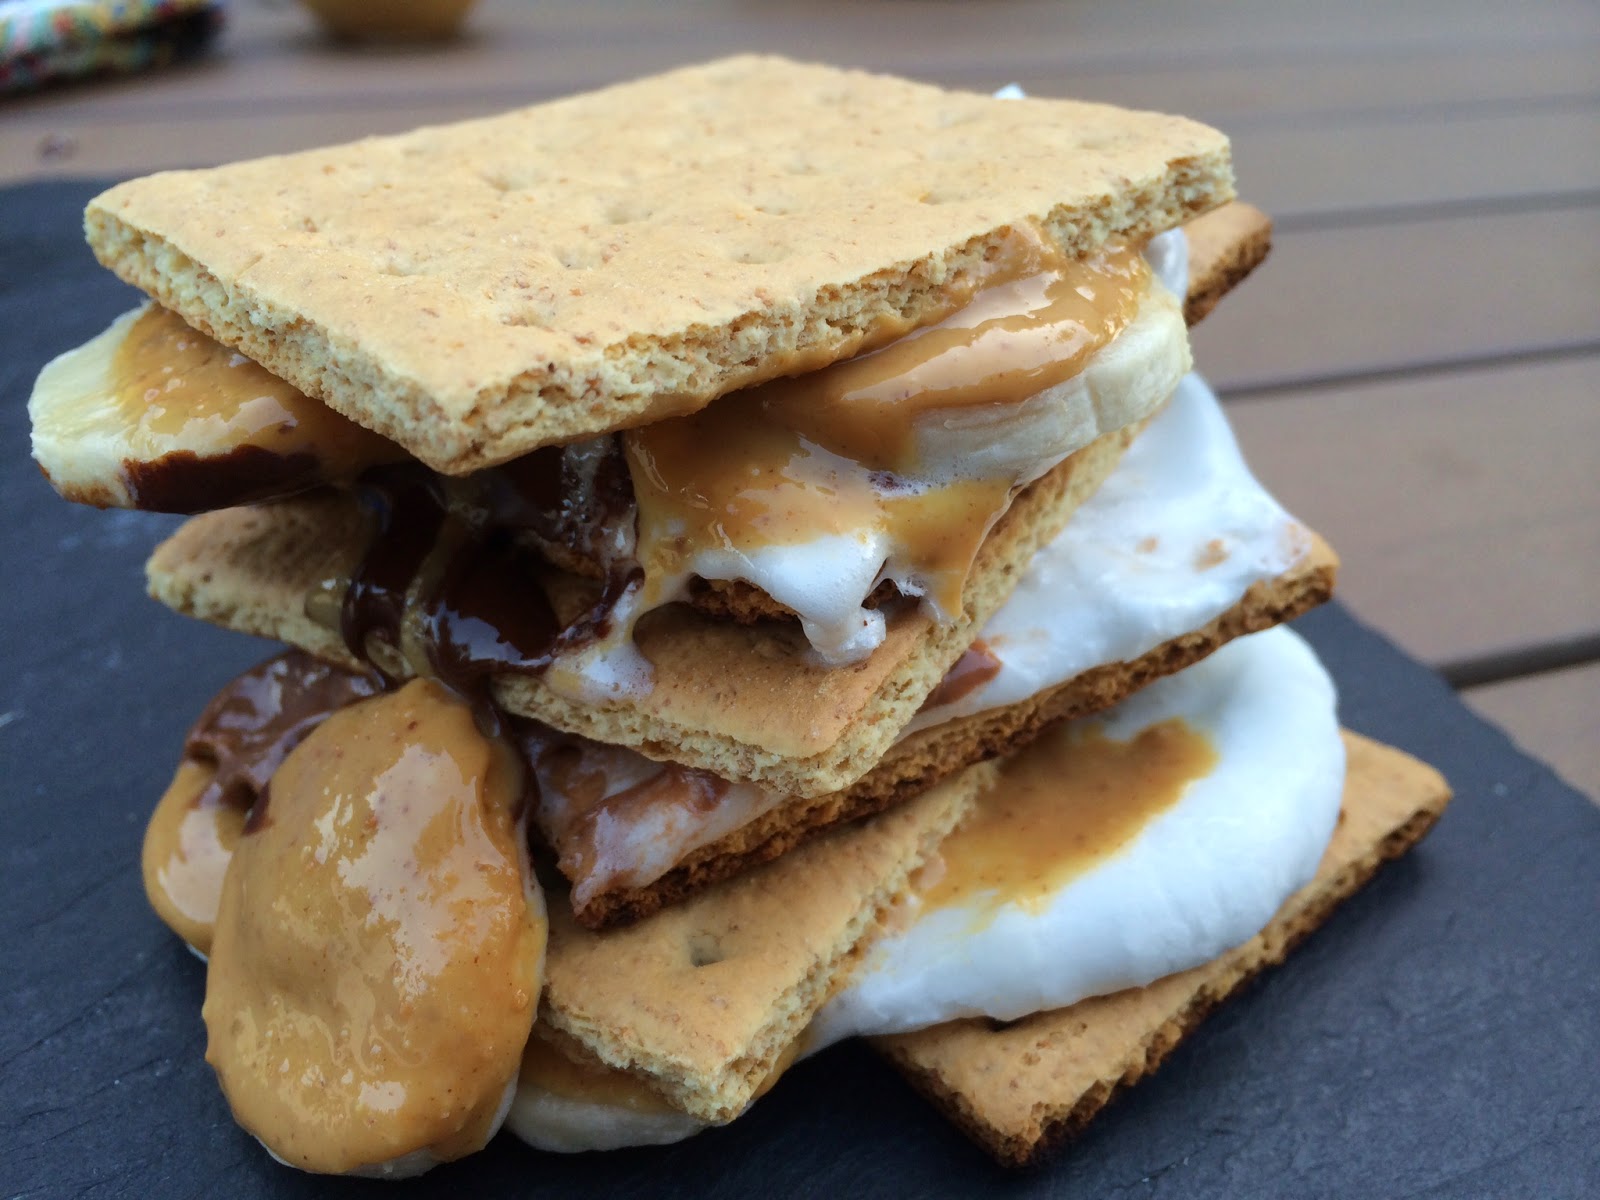 Grilled S'mores with Peanut Butter and Banana